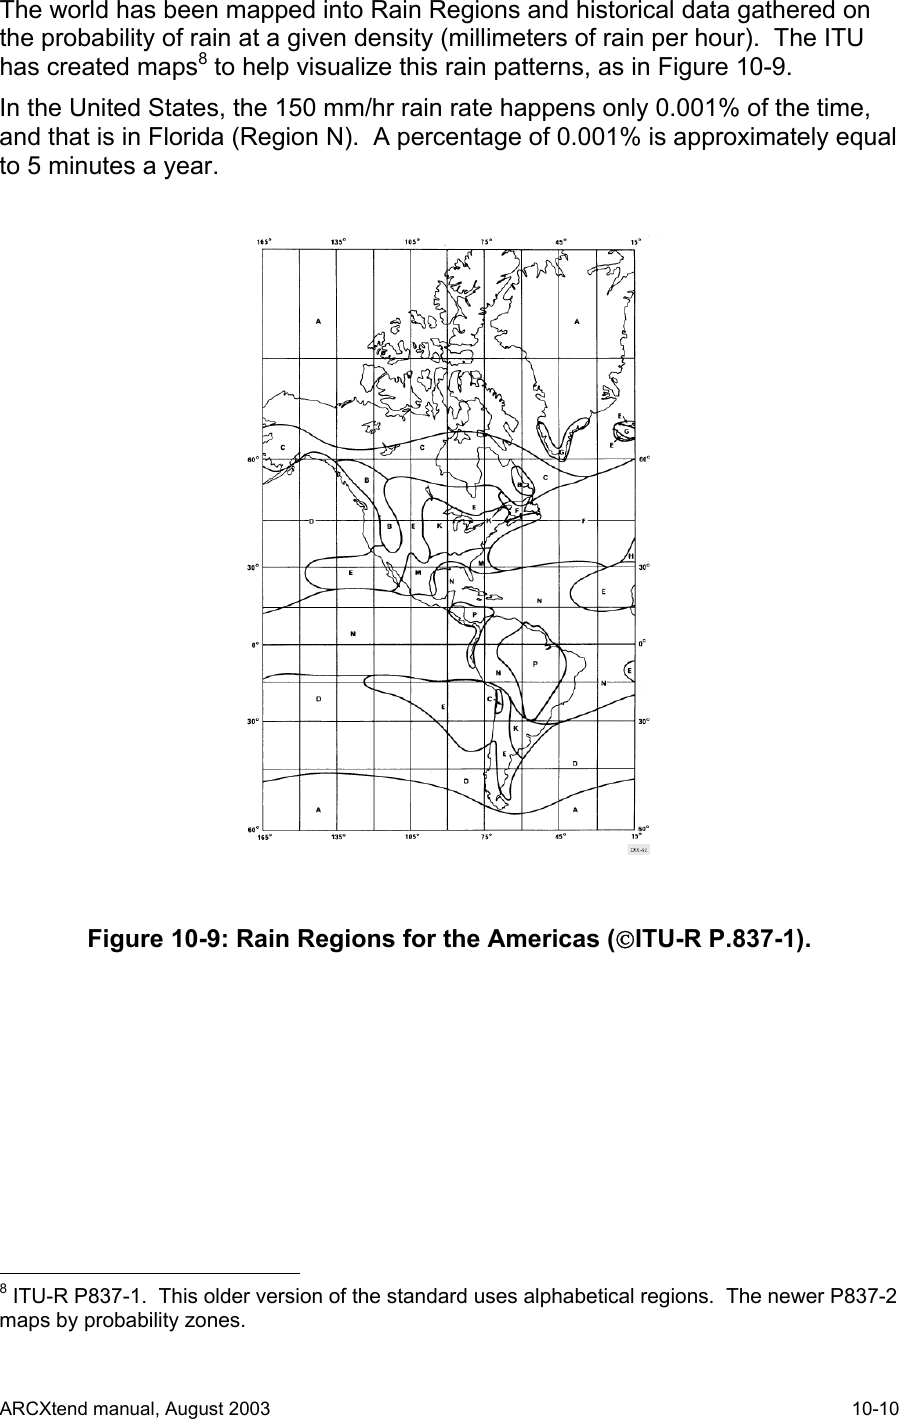  The world has been mapped into Rain Regions and historical data gathered on the probability of rain at a given density (millimeters of rain per hour).  The ITU has created maps8 to help visualize this rain patterns, as in Figure 10-9.    In the United States, the 150 mm/hr rain rate happens only 0.001% of the time, and that is in Florida (Region N).  A percentage of 0.001% is approximately equal to 5 minutes a year.  Figure 10-9: Rain Regions for the Americas (ITU-R P.837-1).                                             8 ITU-R P837-1.  This older version of the standard uses alphabetical regions.  The newer P837-2 maps by probability zones. ARCXtend manual, August 2003    10-10 